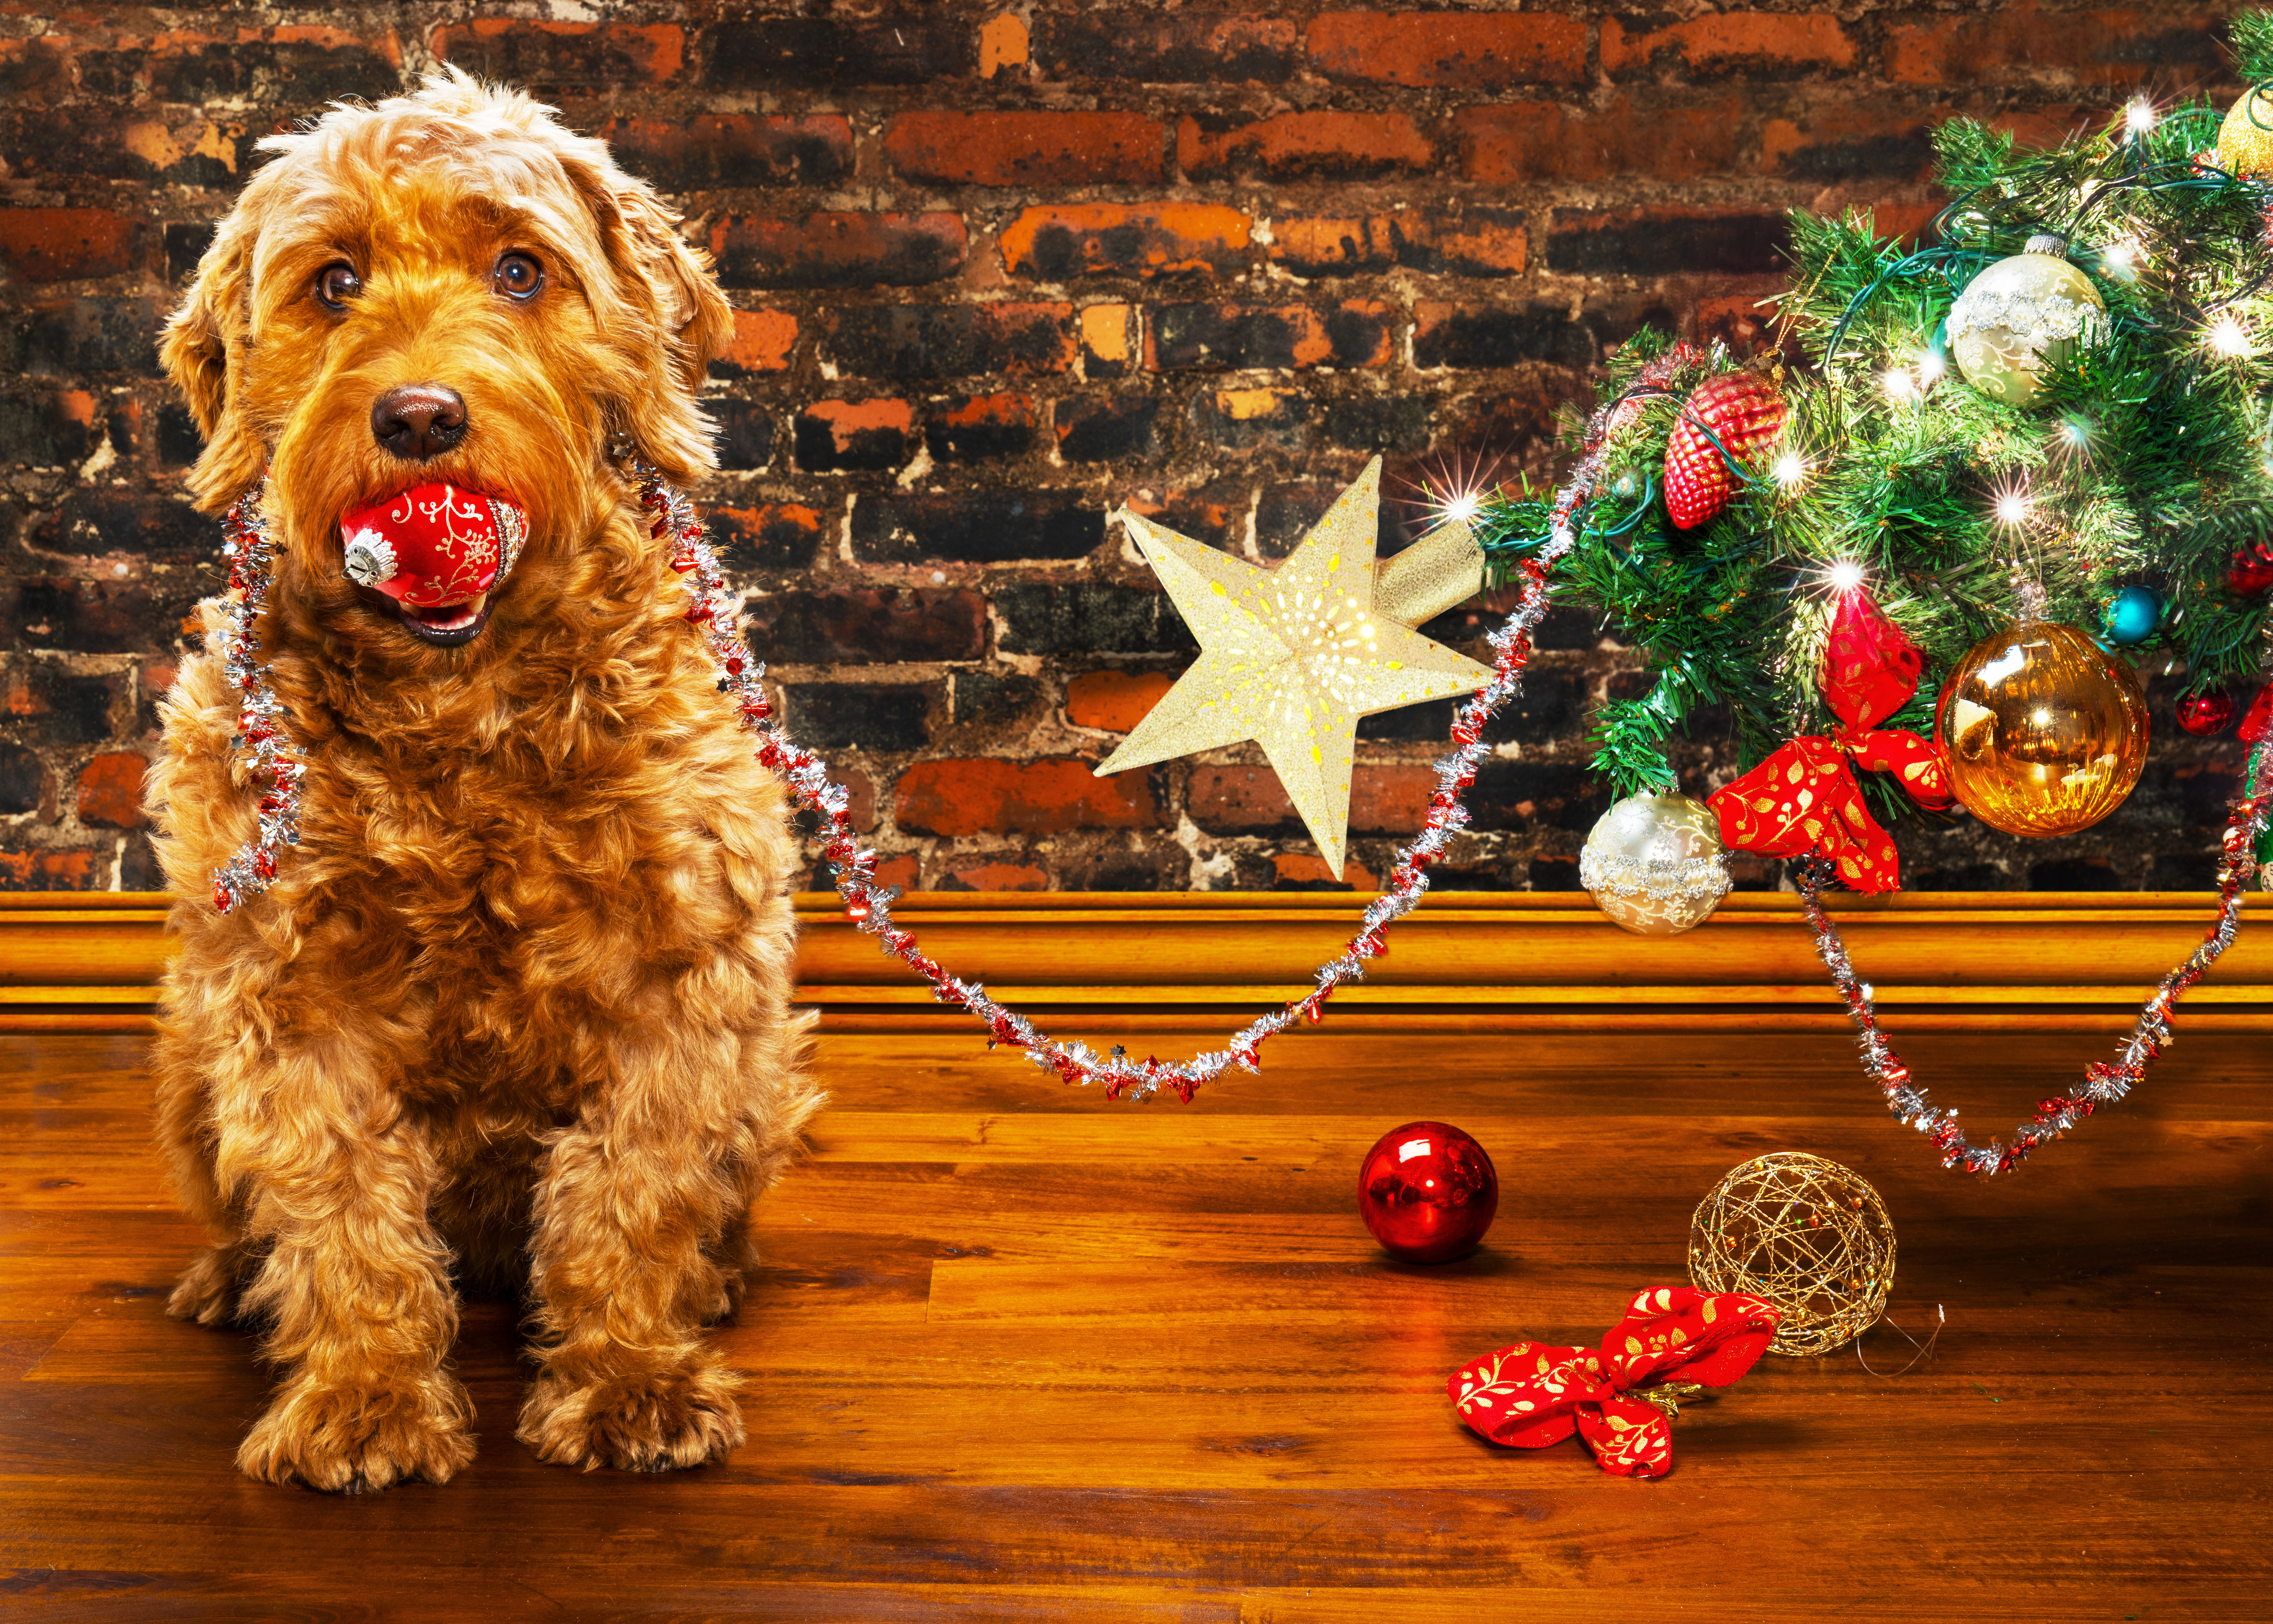 Naughty dog knocks over Christmas tree and tried to eat ornaments